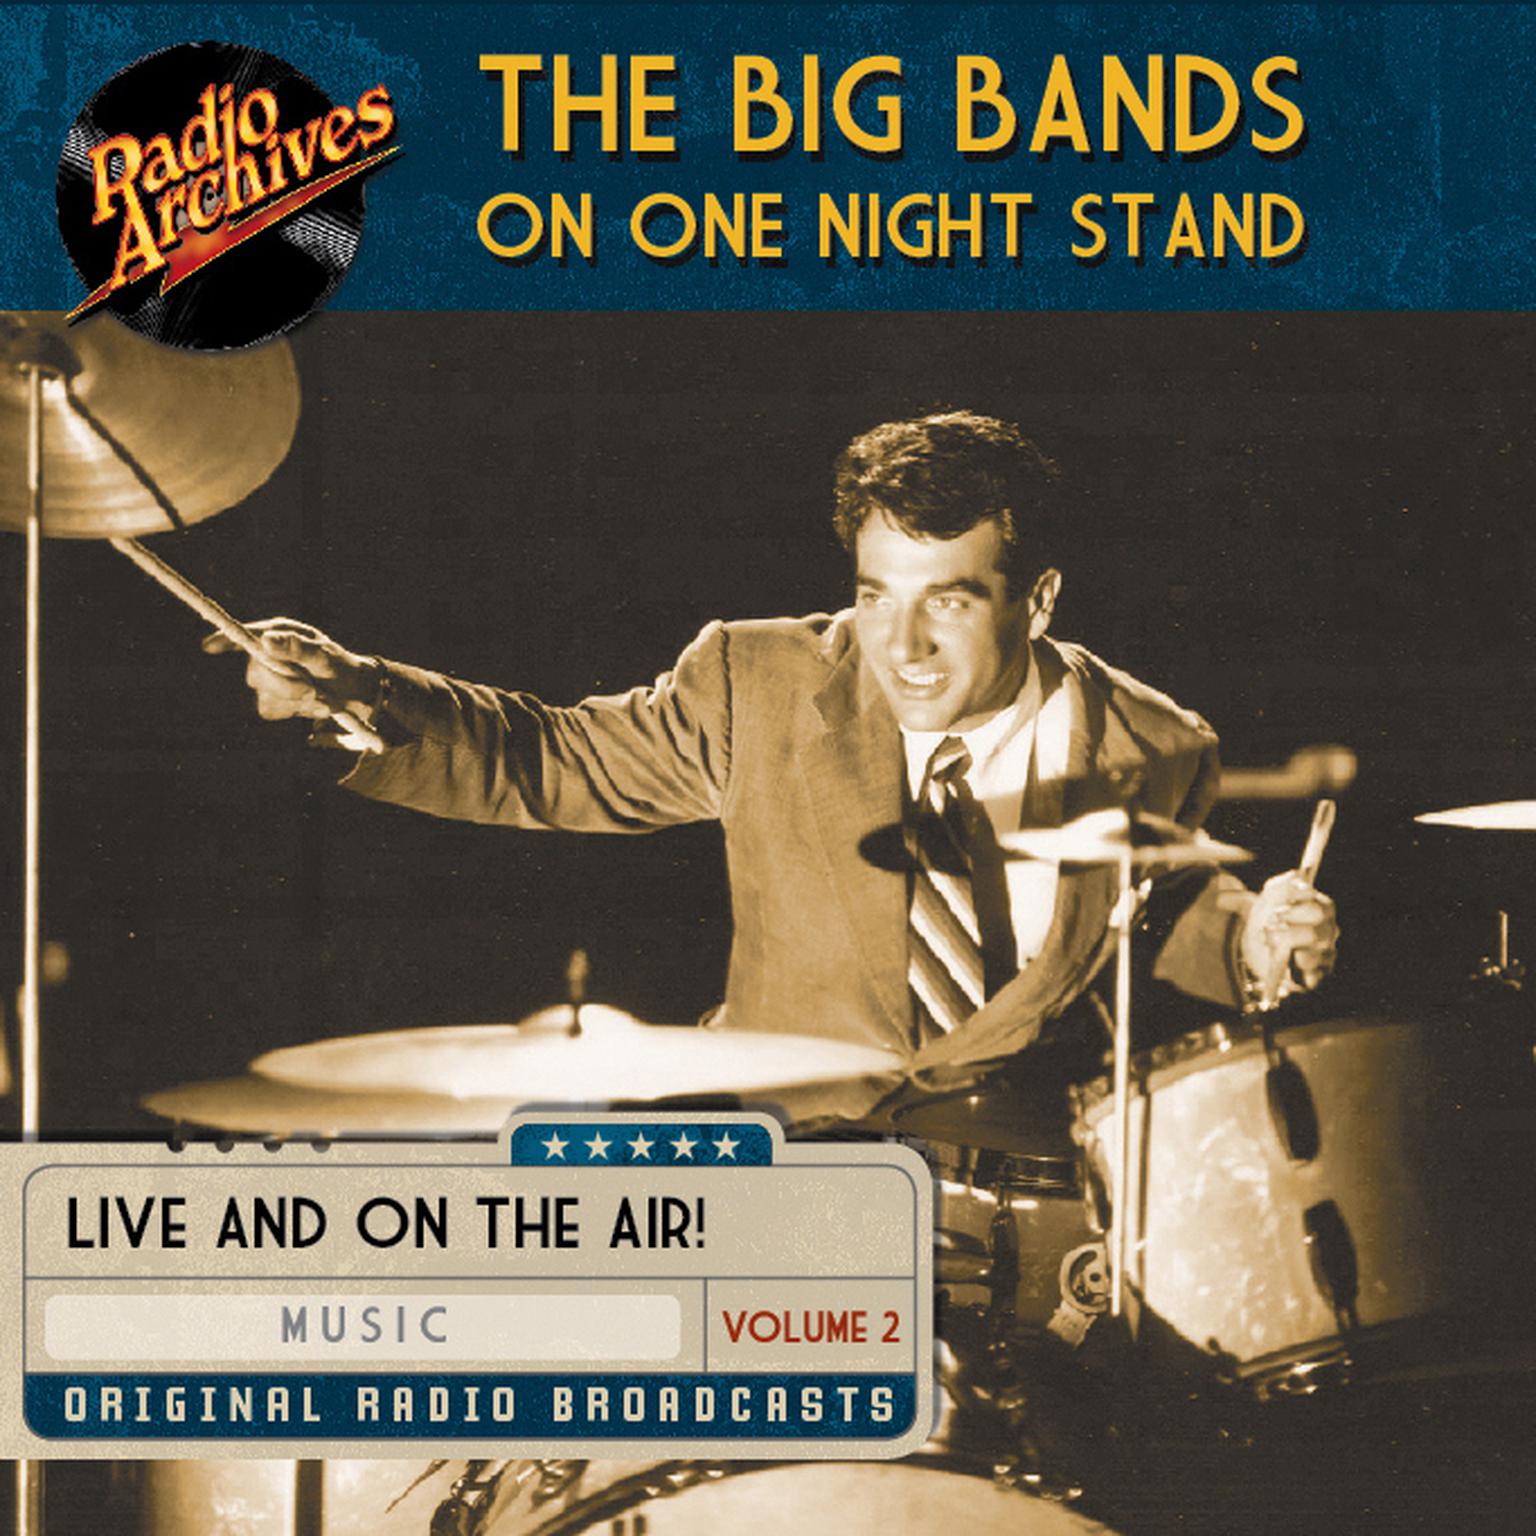 Big Bands on One Night Stand, Volume 2 Audiobook, by various authors